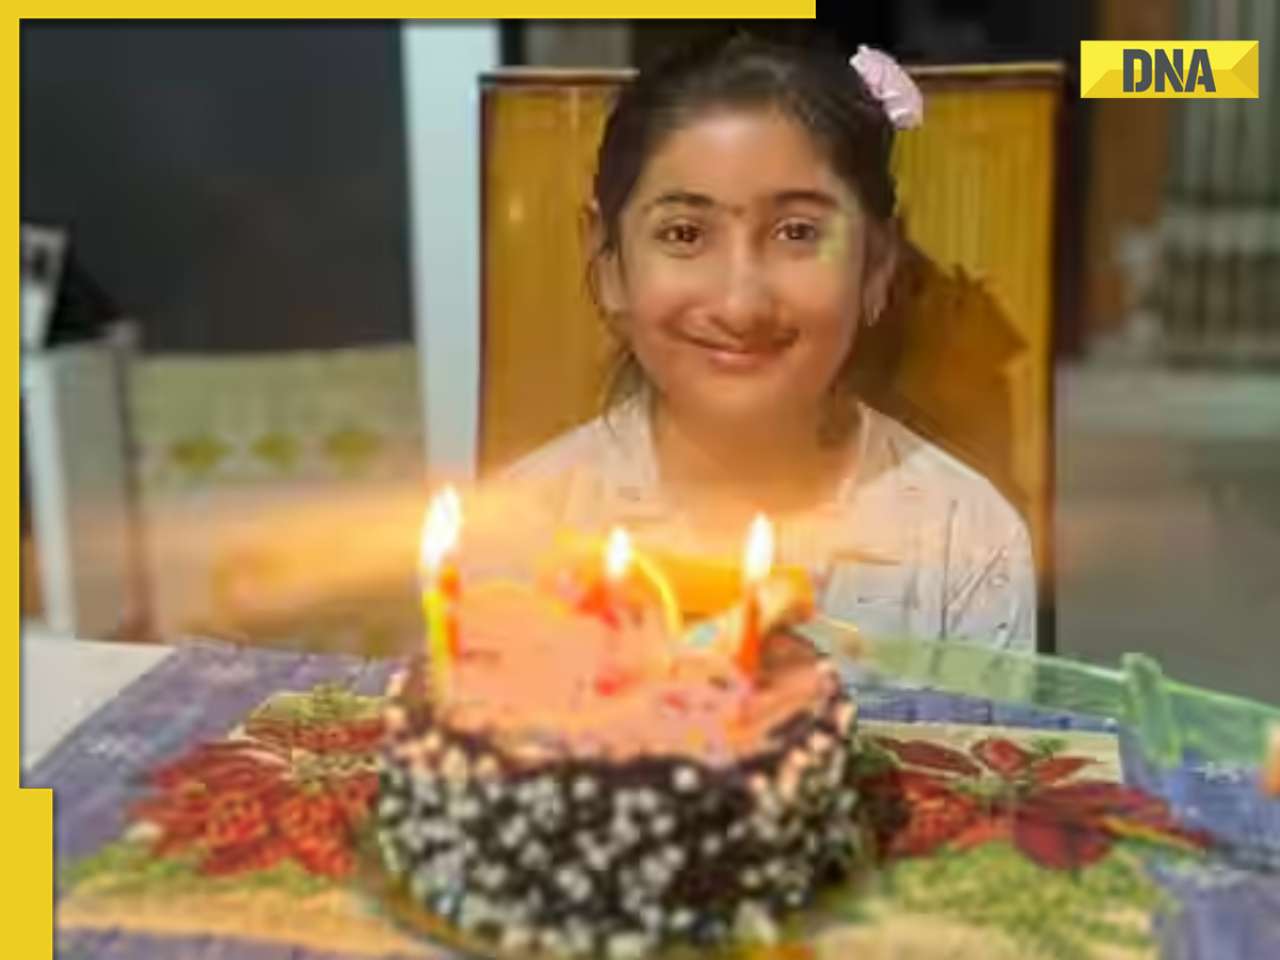 10-year-old girl dies shortly after eating her birthday cake, know what happened